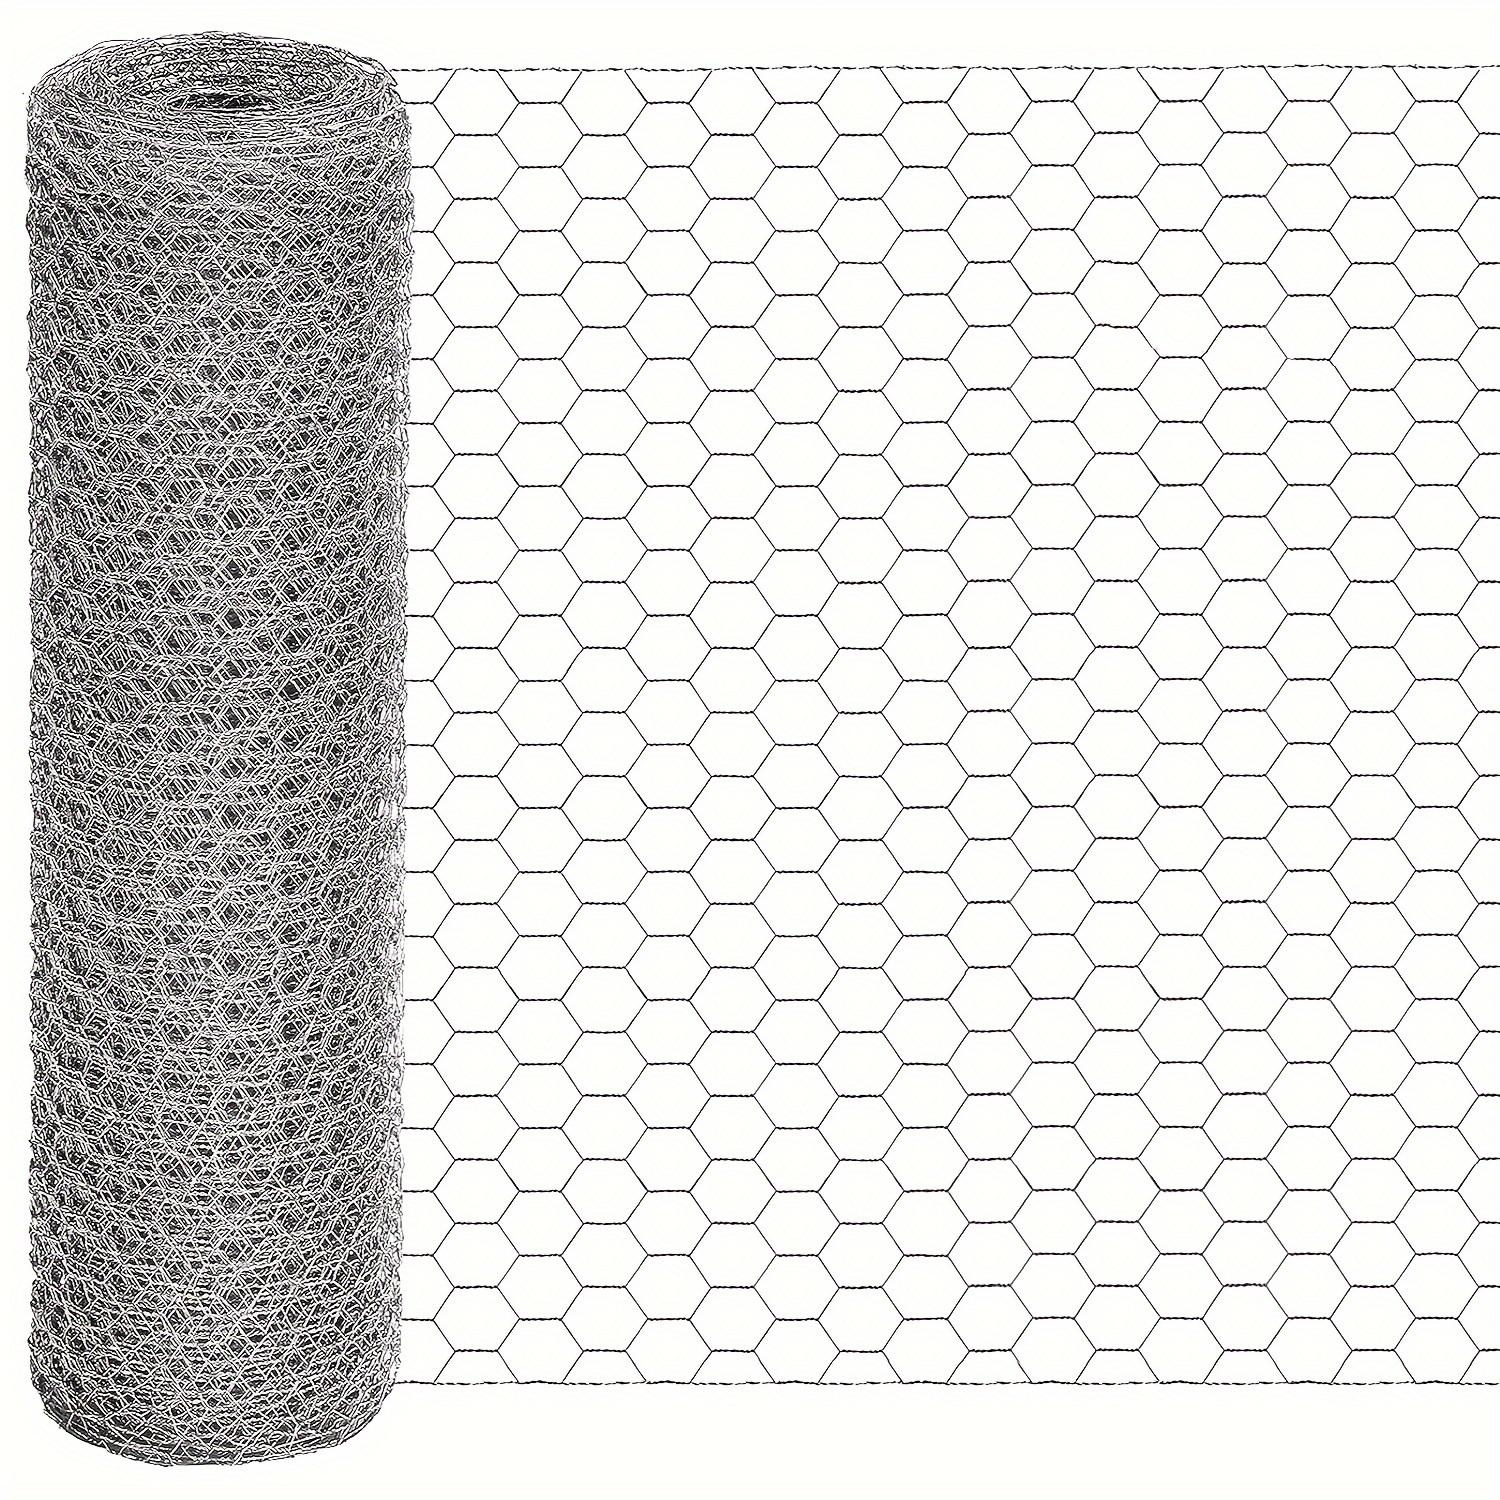 

Hexagon Galvanized Metal Mesh Fence - Non-waterproof Outdoor Barrier For Gardens, Plant Protection - Chicken Coop Wire Netting, Pet Fencing, Window Guard - Size Options 0.35x4m/0.35x8m